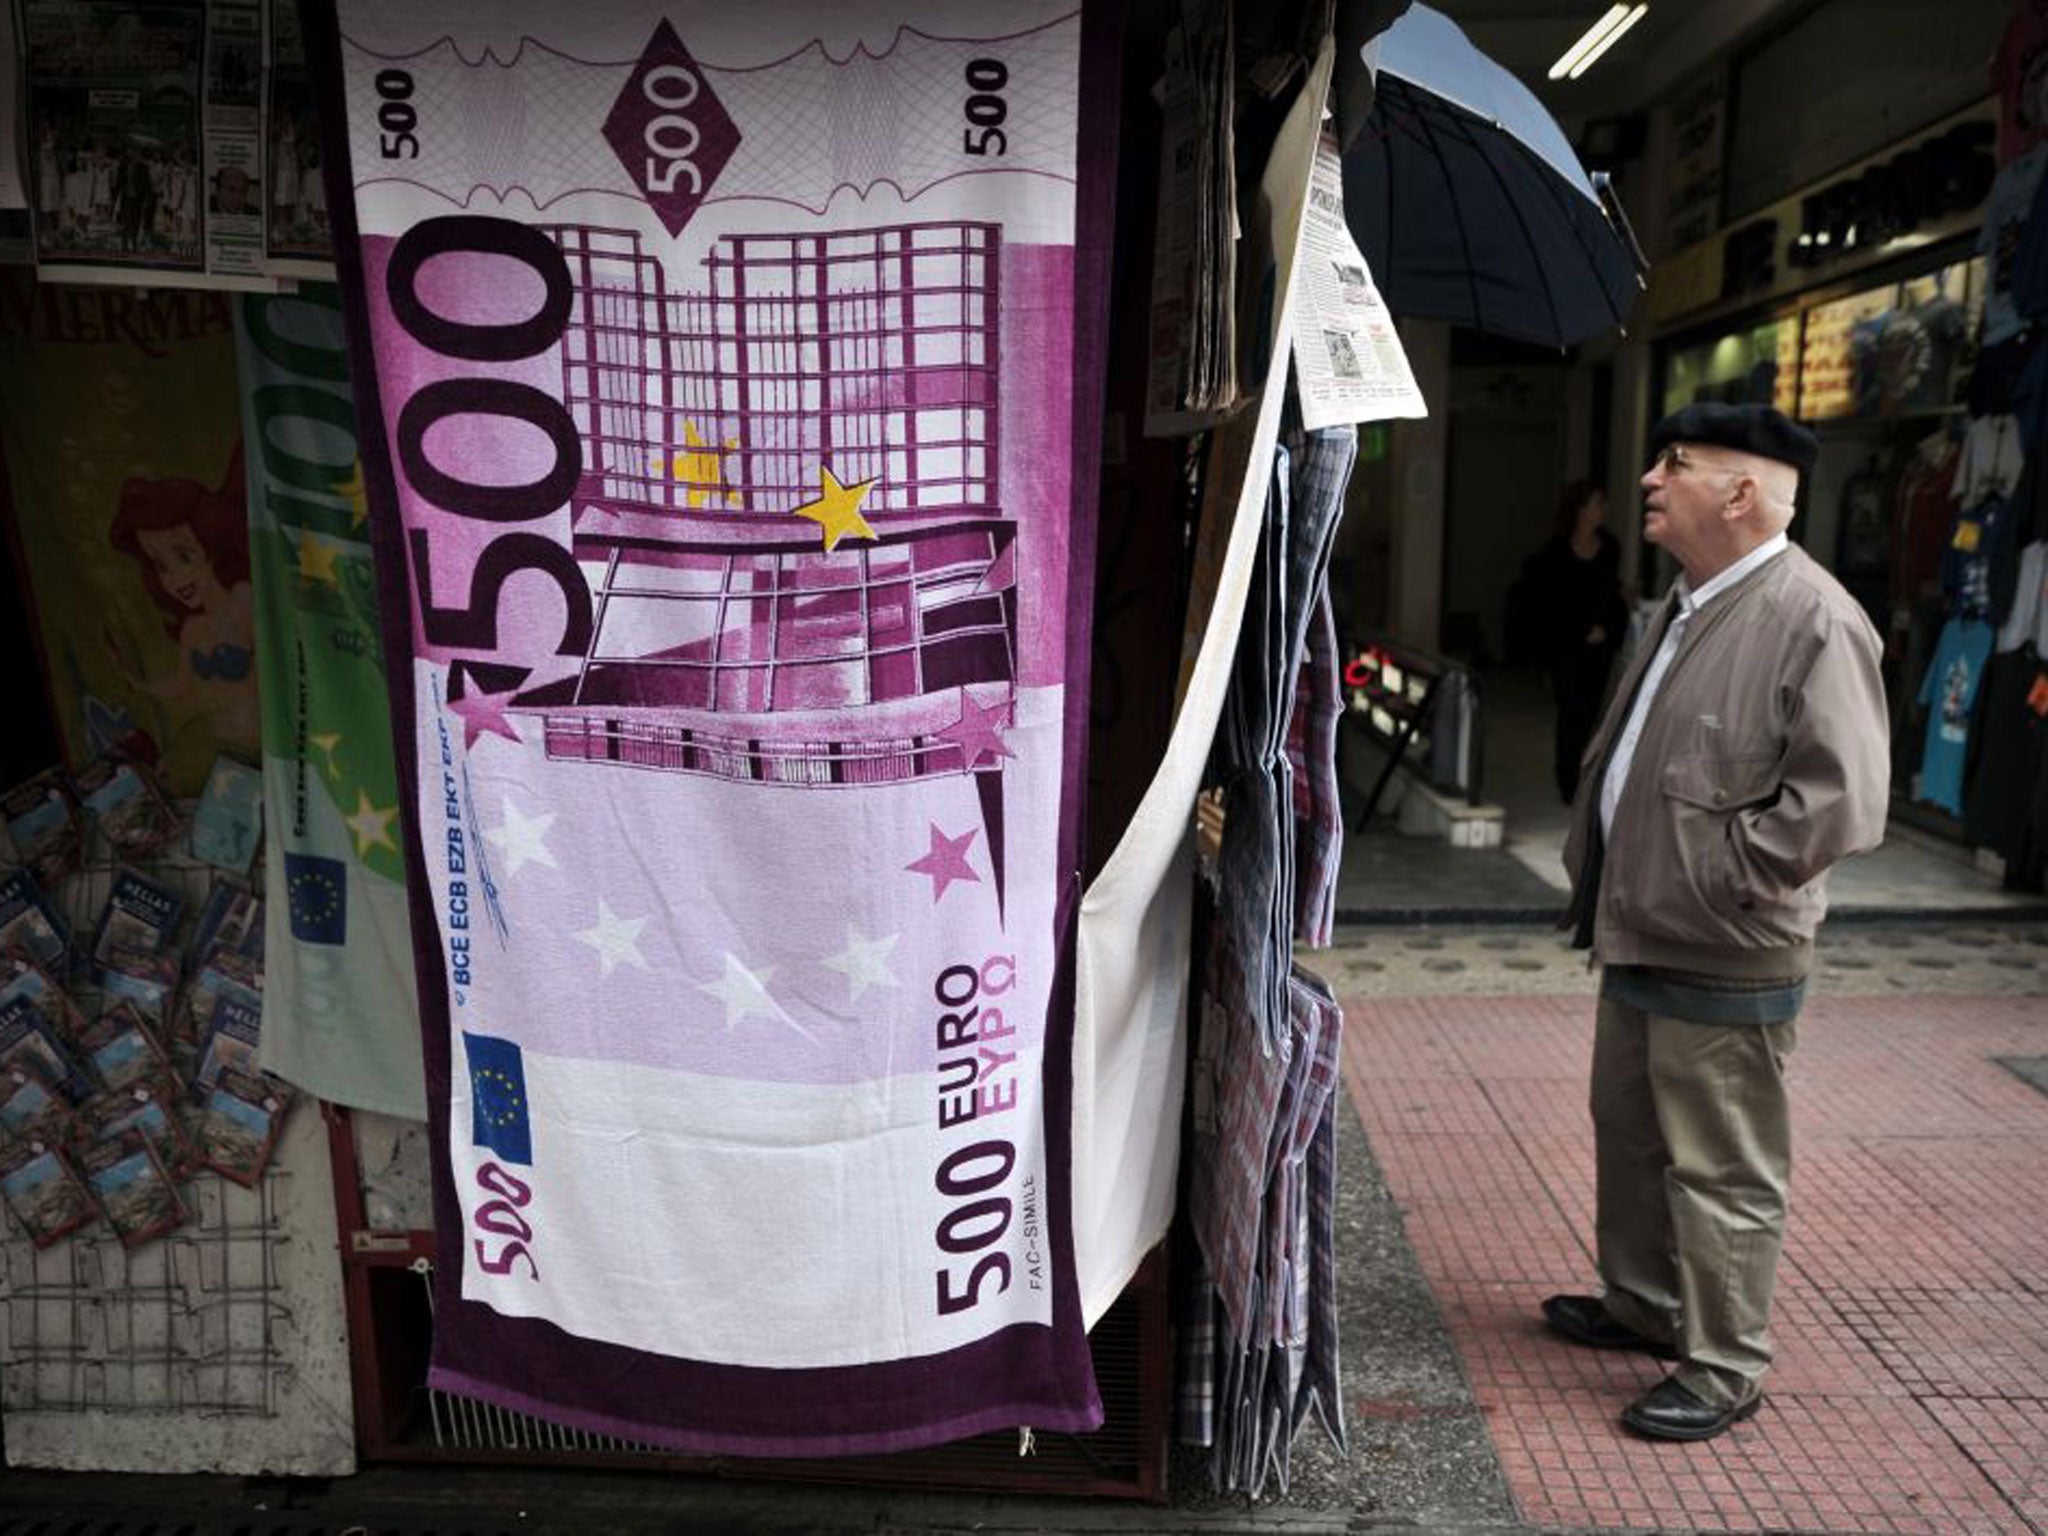 The highest-value euro banknote, the €500, became known as the ‘Bin Laden’, as it was popular with money-laundering terrorist organisations. It was phased out in 2016